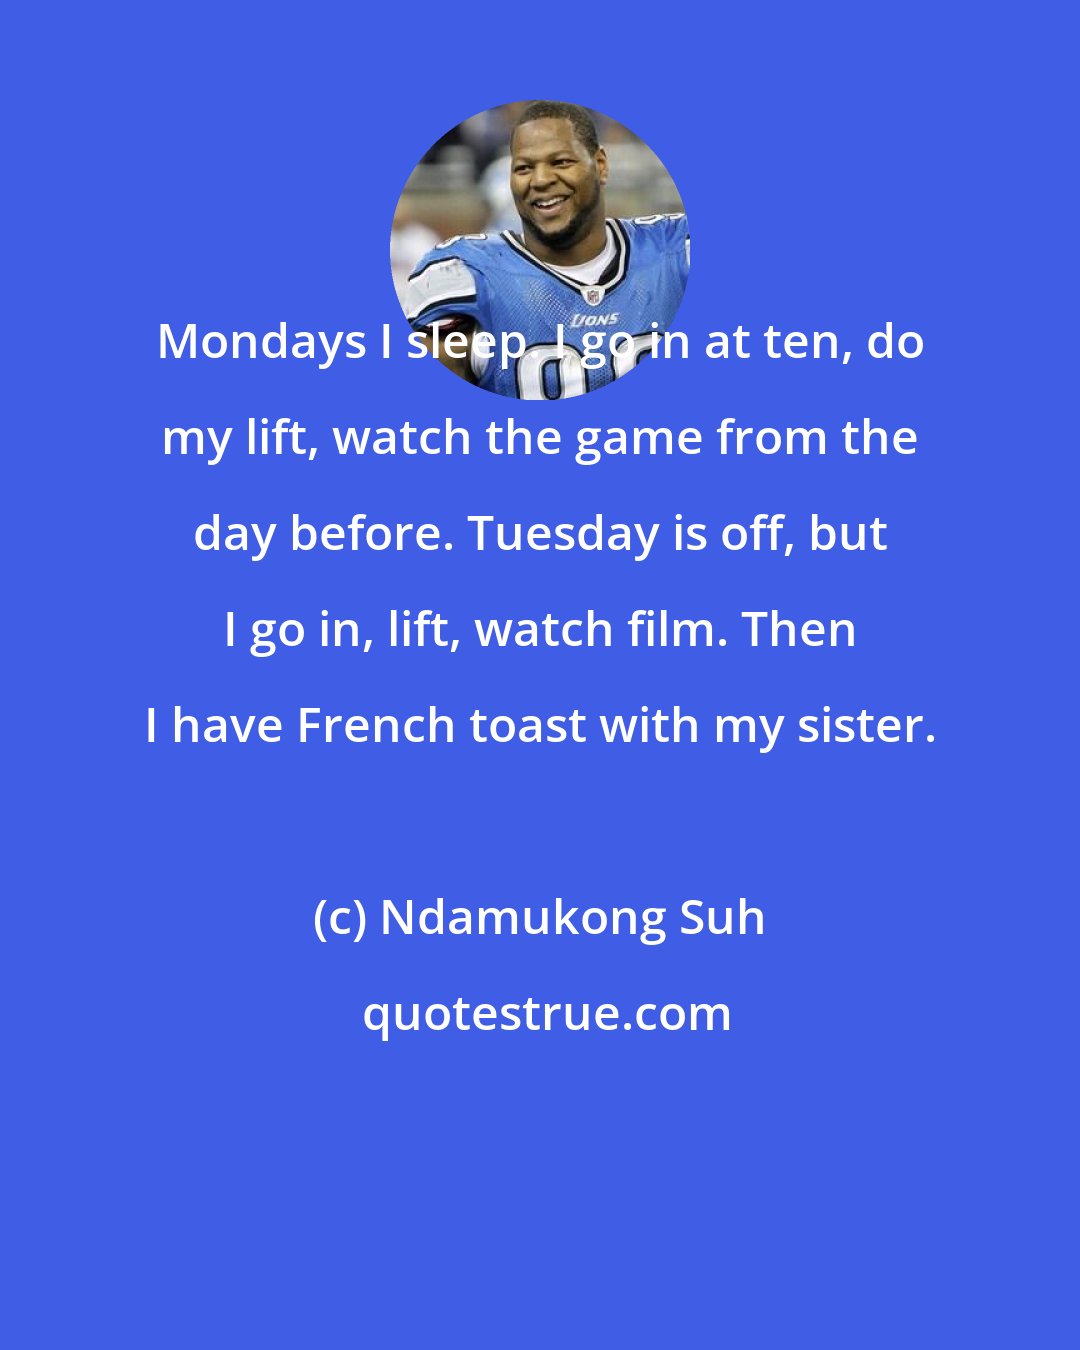 Ndamukong Suh: Mondays I sleep. I go in at ten, do my lift, watch the game from the day before. Tuesday is off, but I go in, lift, watch film. Then I have French toast with my sister.